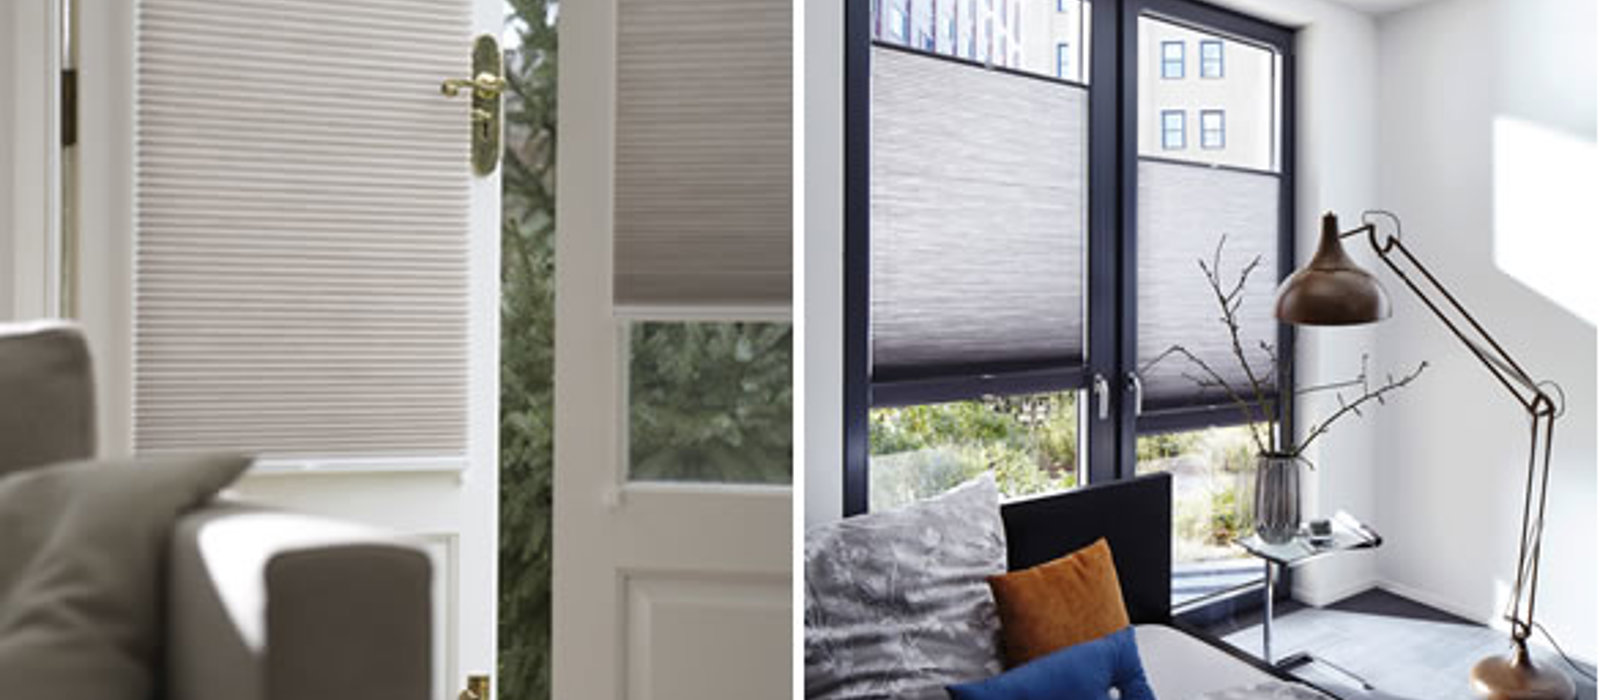 Duette blinds fitted to french doors and windows to keep home cool